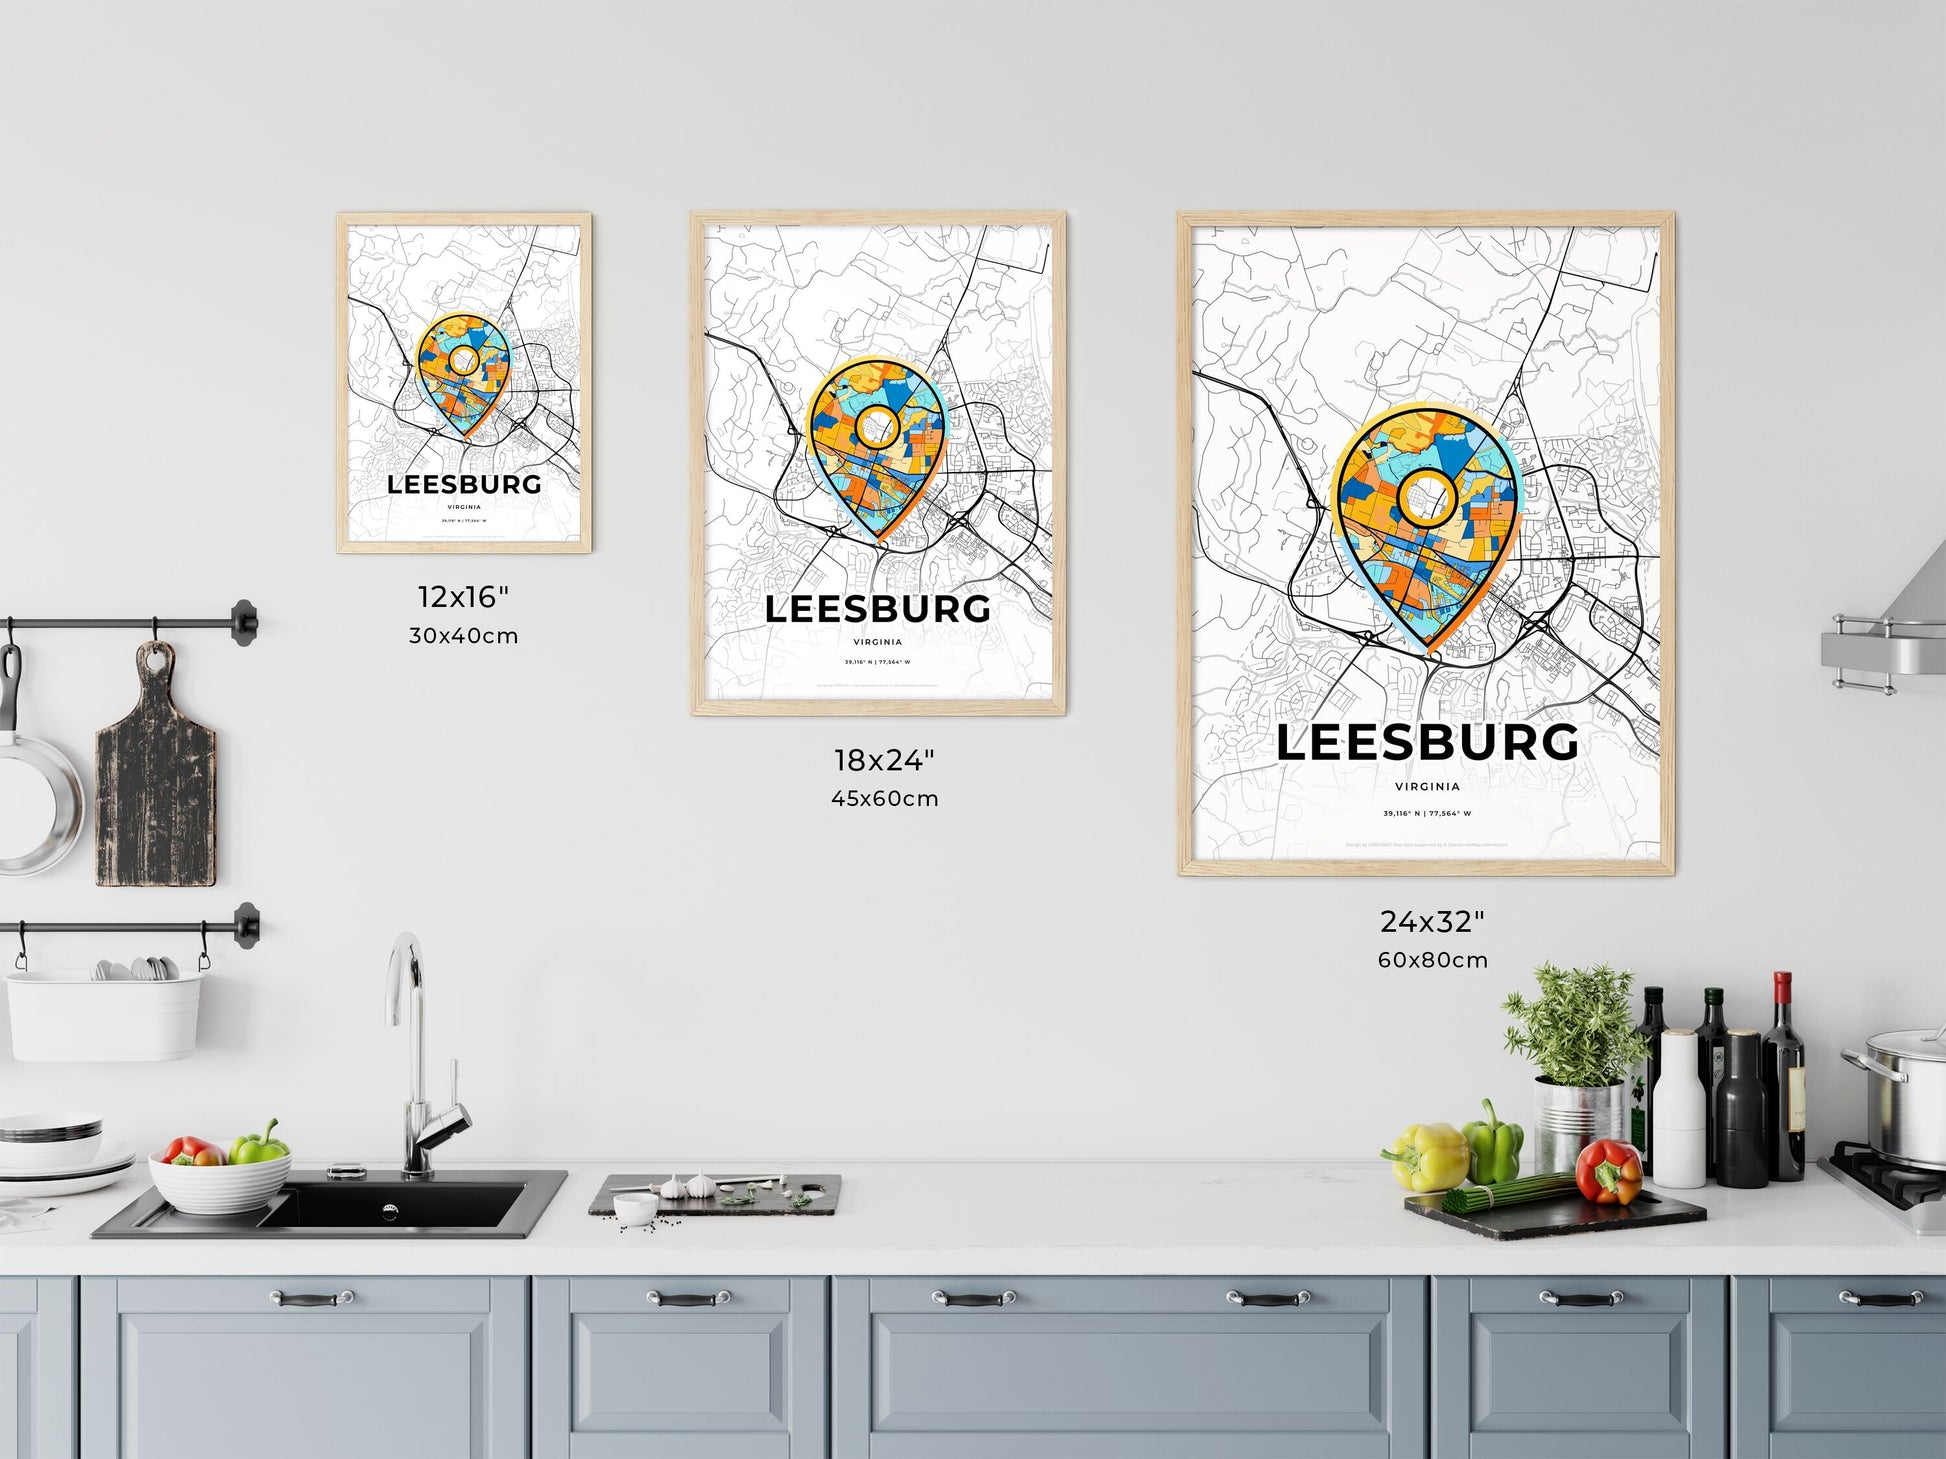 LEESBURG VIRGINIA minimal art map with a colorful icon. Where it all began, Couple map gift.